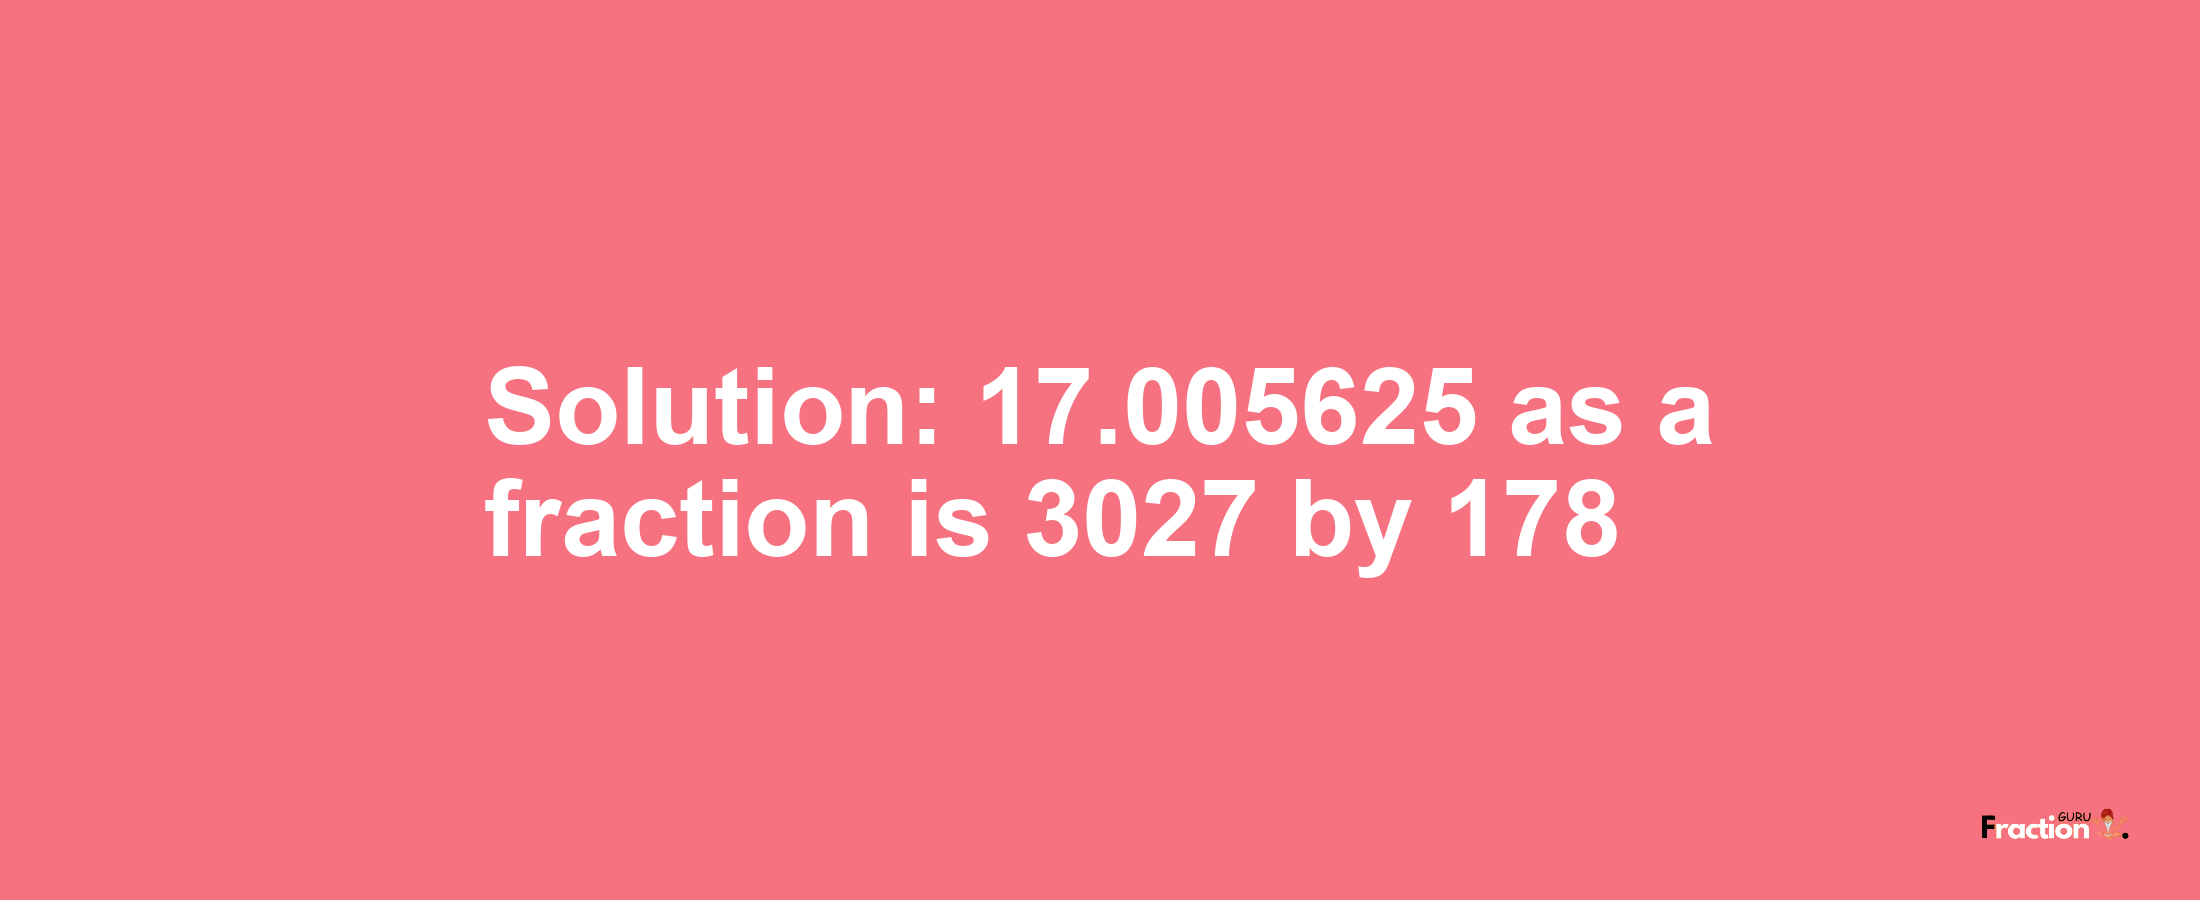 Solution:17.005625 as a fraction is 3027/178